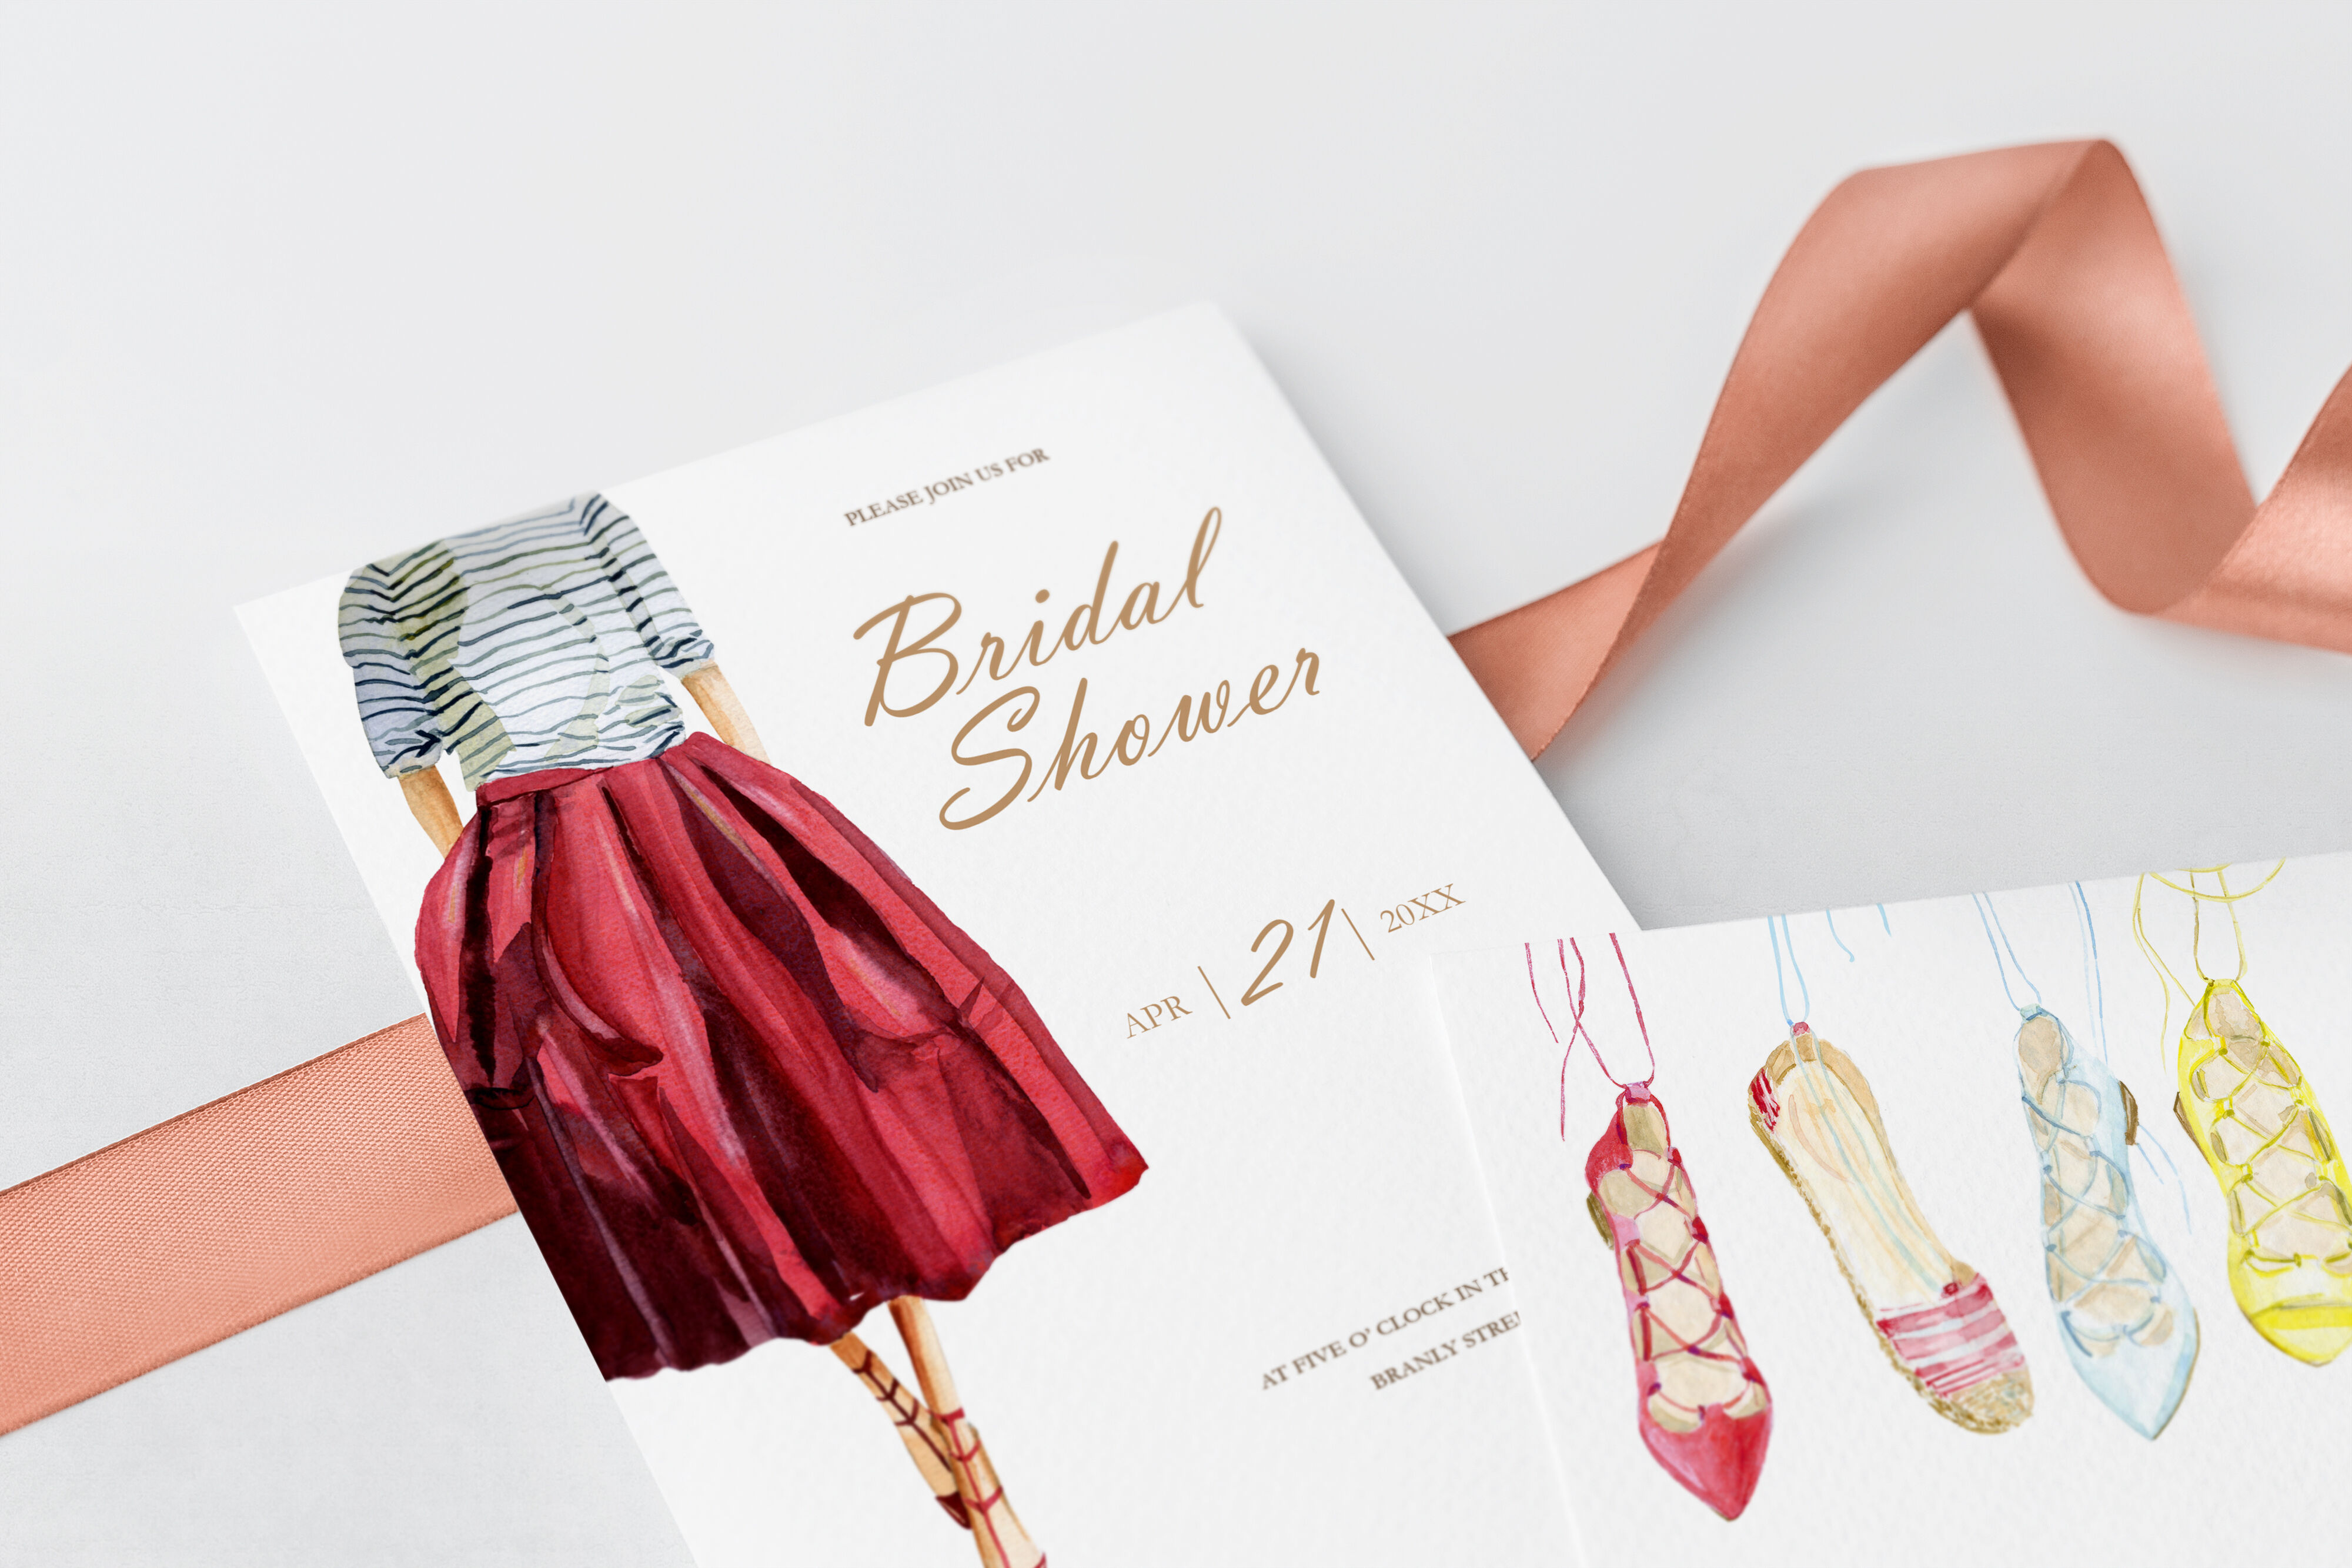 bridal shower clipart for invitations